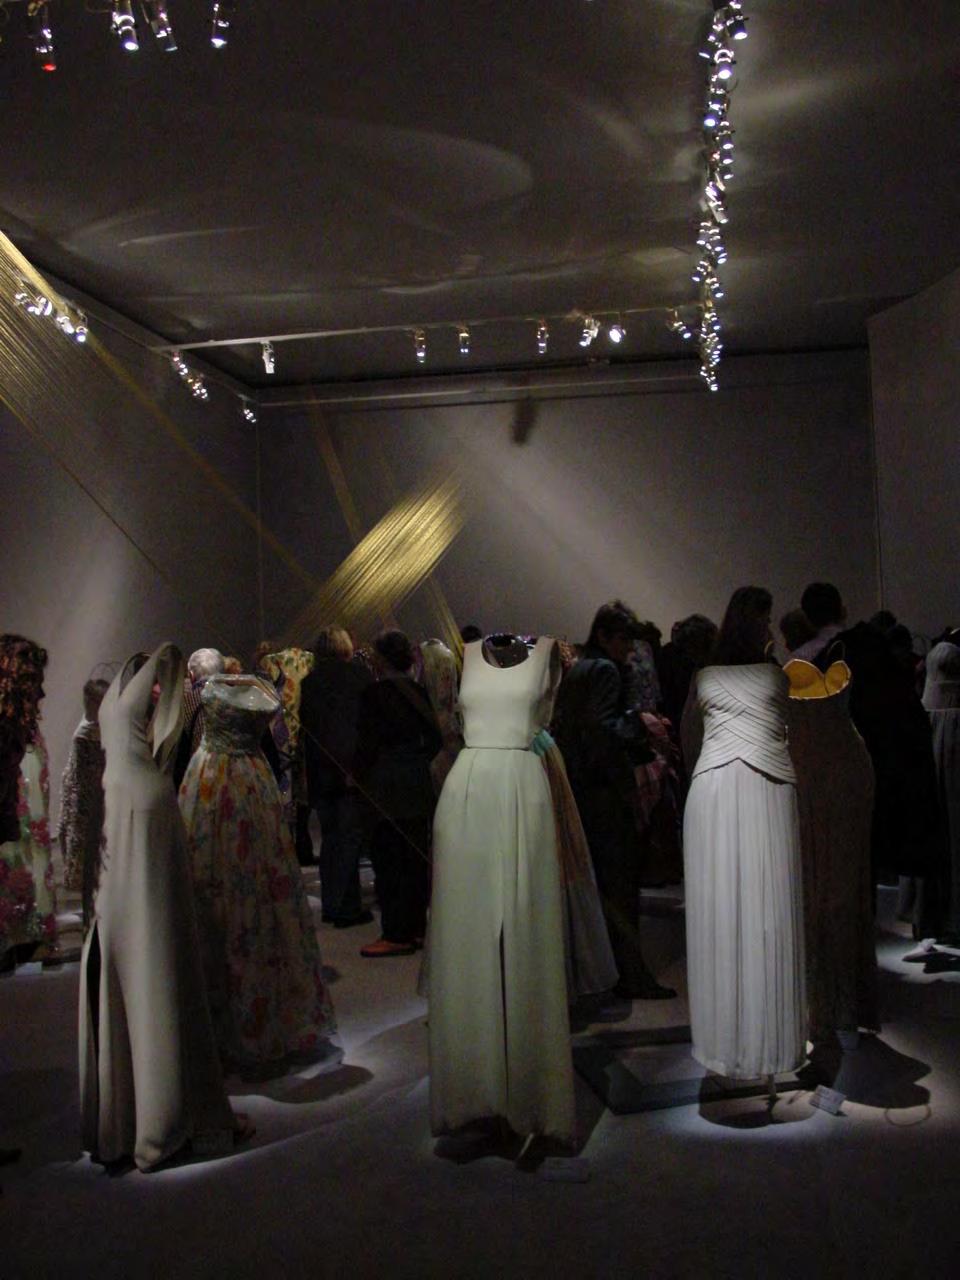 Fashion industry and museum exhibitions -a happy marriage?